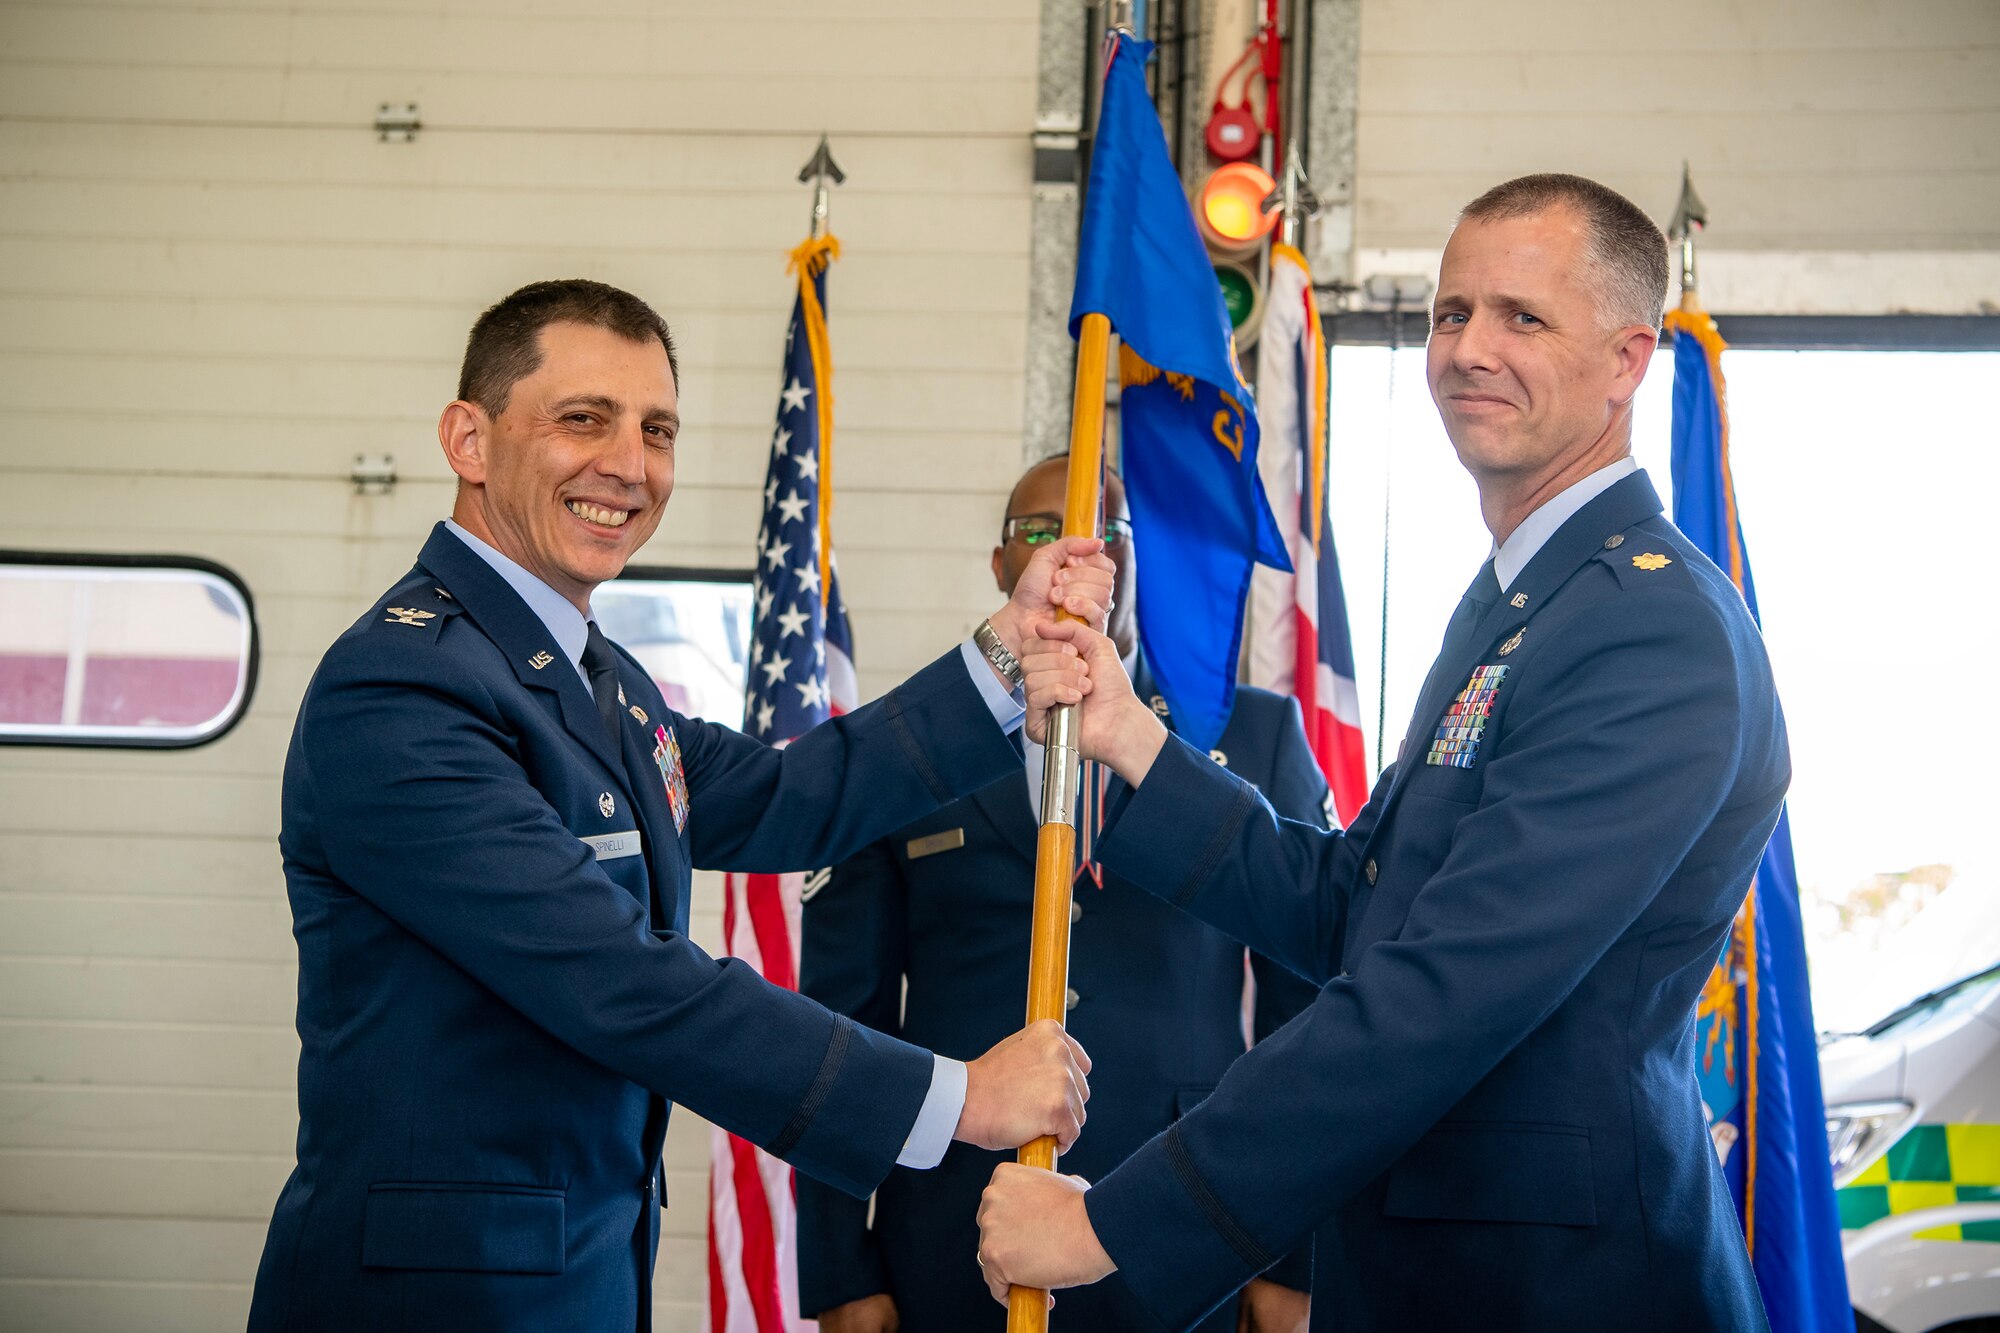 U.S. Air Force Col. Edward Spinelli, left,  422d Air Base Group commander, presents the 422d Civil Engineer Squadron guidon to Maj. Kirk Hull, 422d CES incoming commander, during a change of command ceremony at RAF Croughton, England, June 15, 2023. Prior to assuming command, Hull served as the commander of the Programs and Evaluations Flight at the 554th RED HORSE Squadron, Andersen AFB, Guam. (U.S. Air Force photo by Staff Sgt. Eugene Oliver)